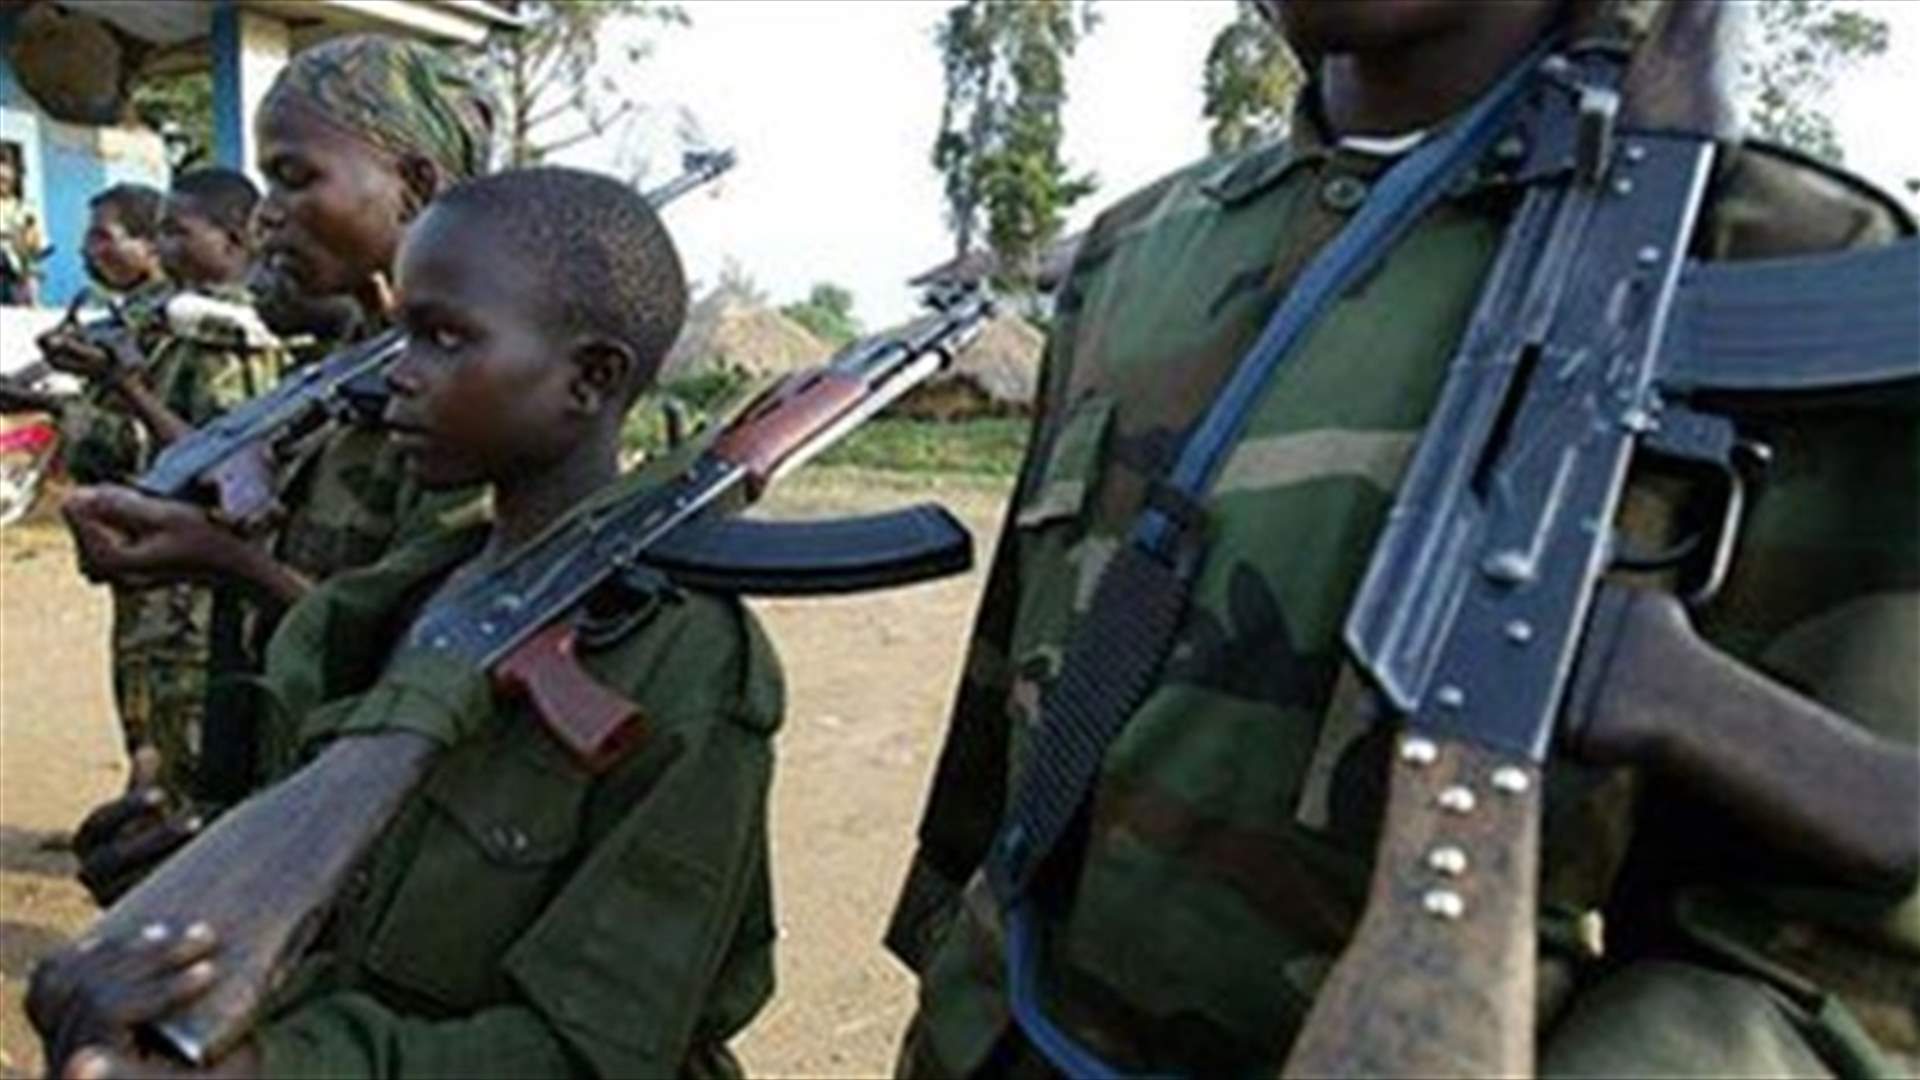 United Nations sees increase in child soldiers recruited in S. Sudan